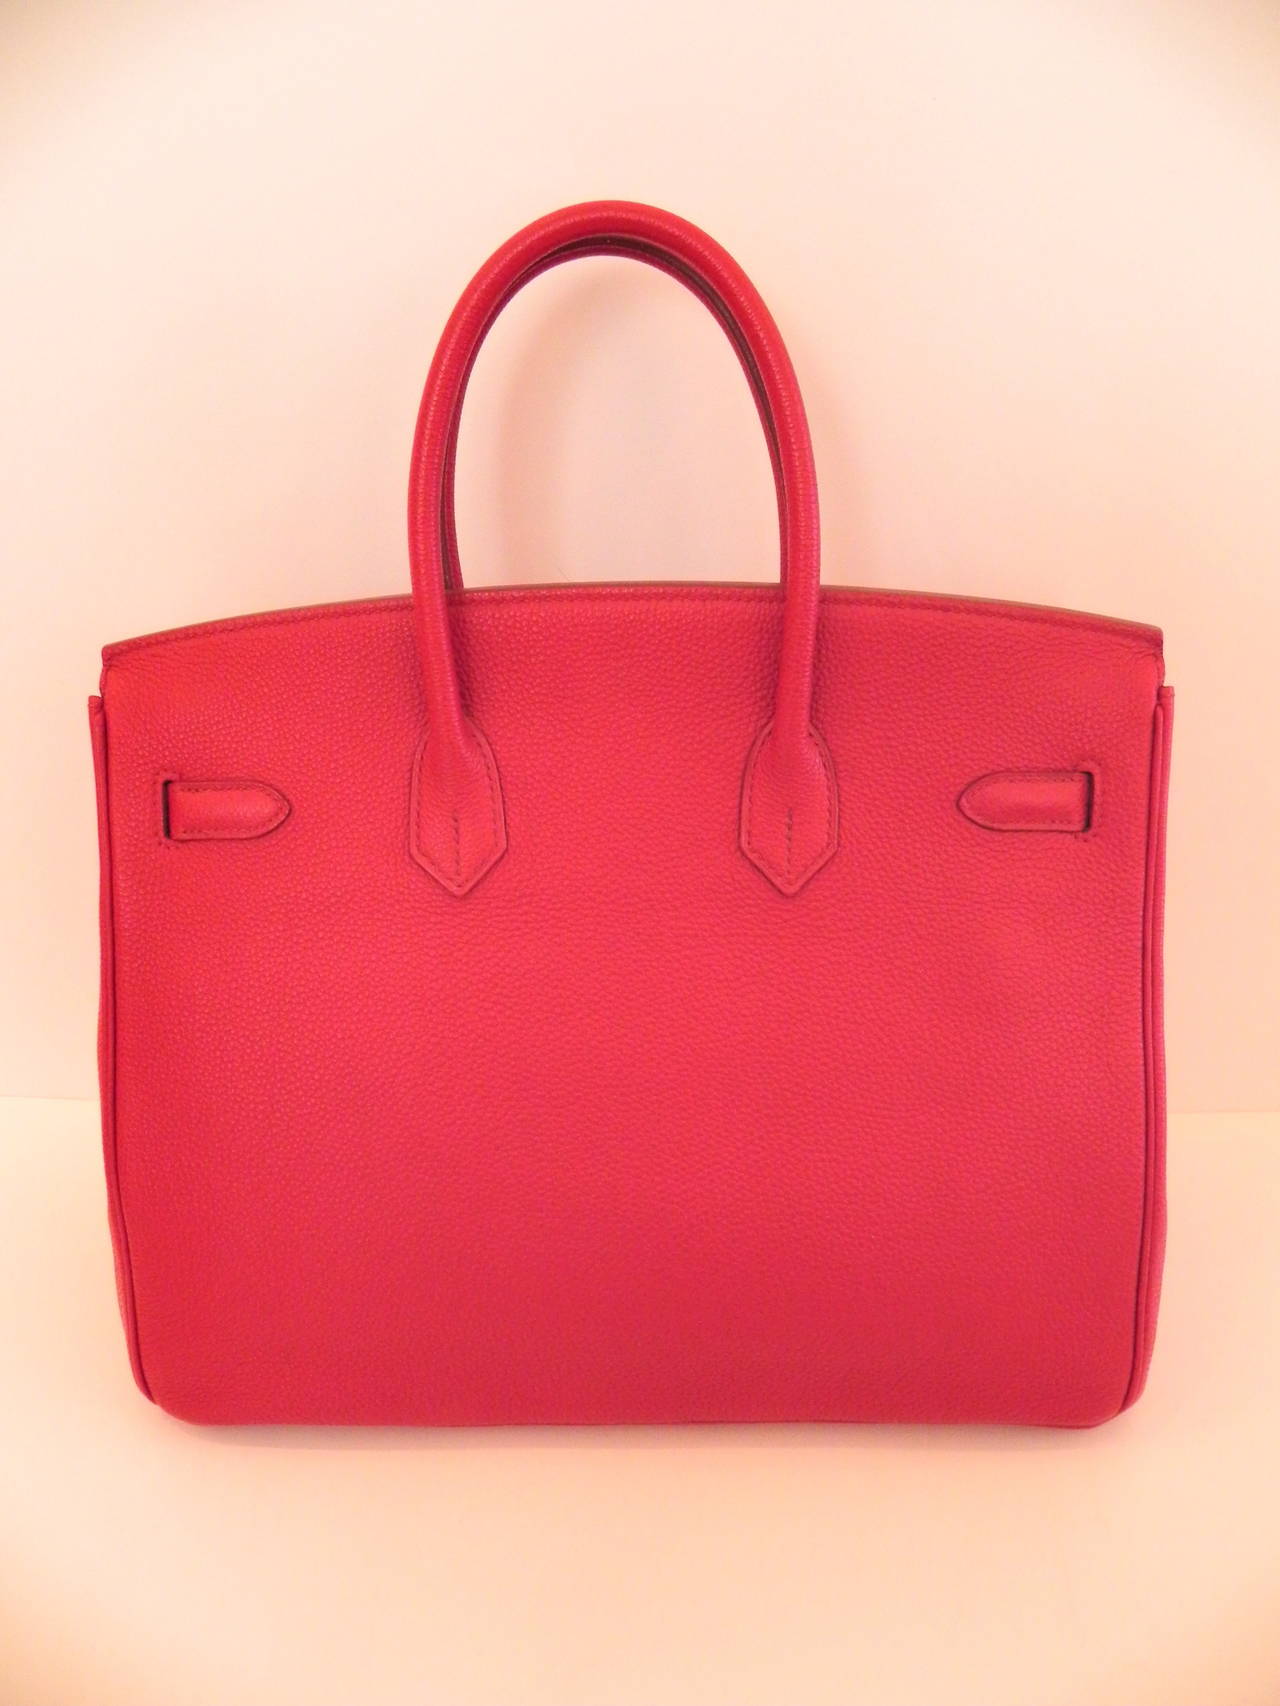 Hermes Birkin 35 cm Red Rouge Garance Clemence bag .

Palladium Hardware .Excellent condition with no scratches or any wear at all .

Circa 2009-2010  M Square year   CO.3

Comes with original Hermes Dust bag and Box 

Rare in this color and